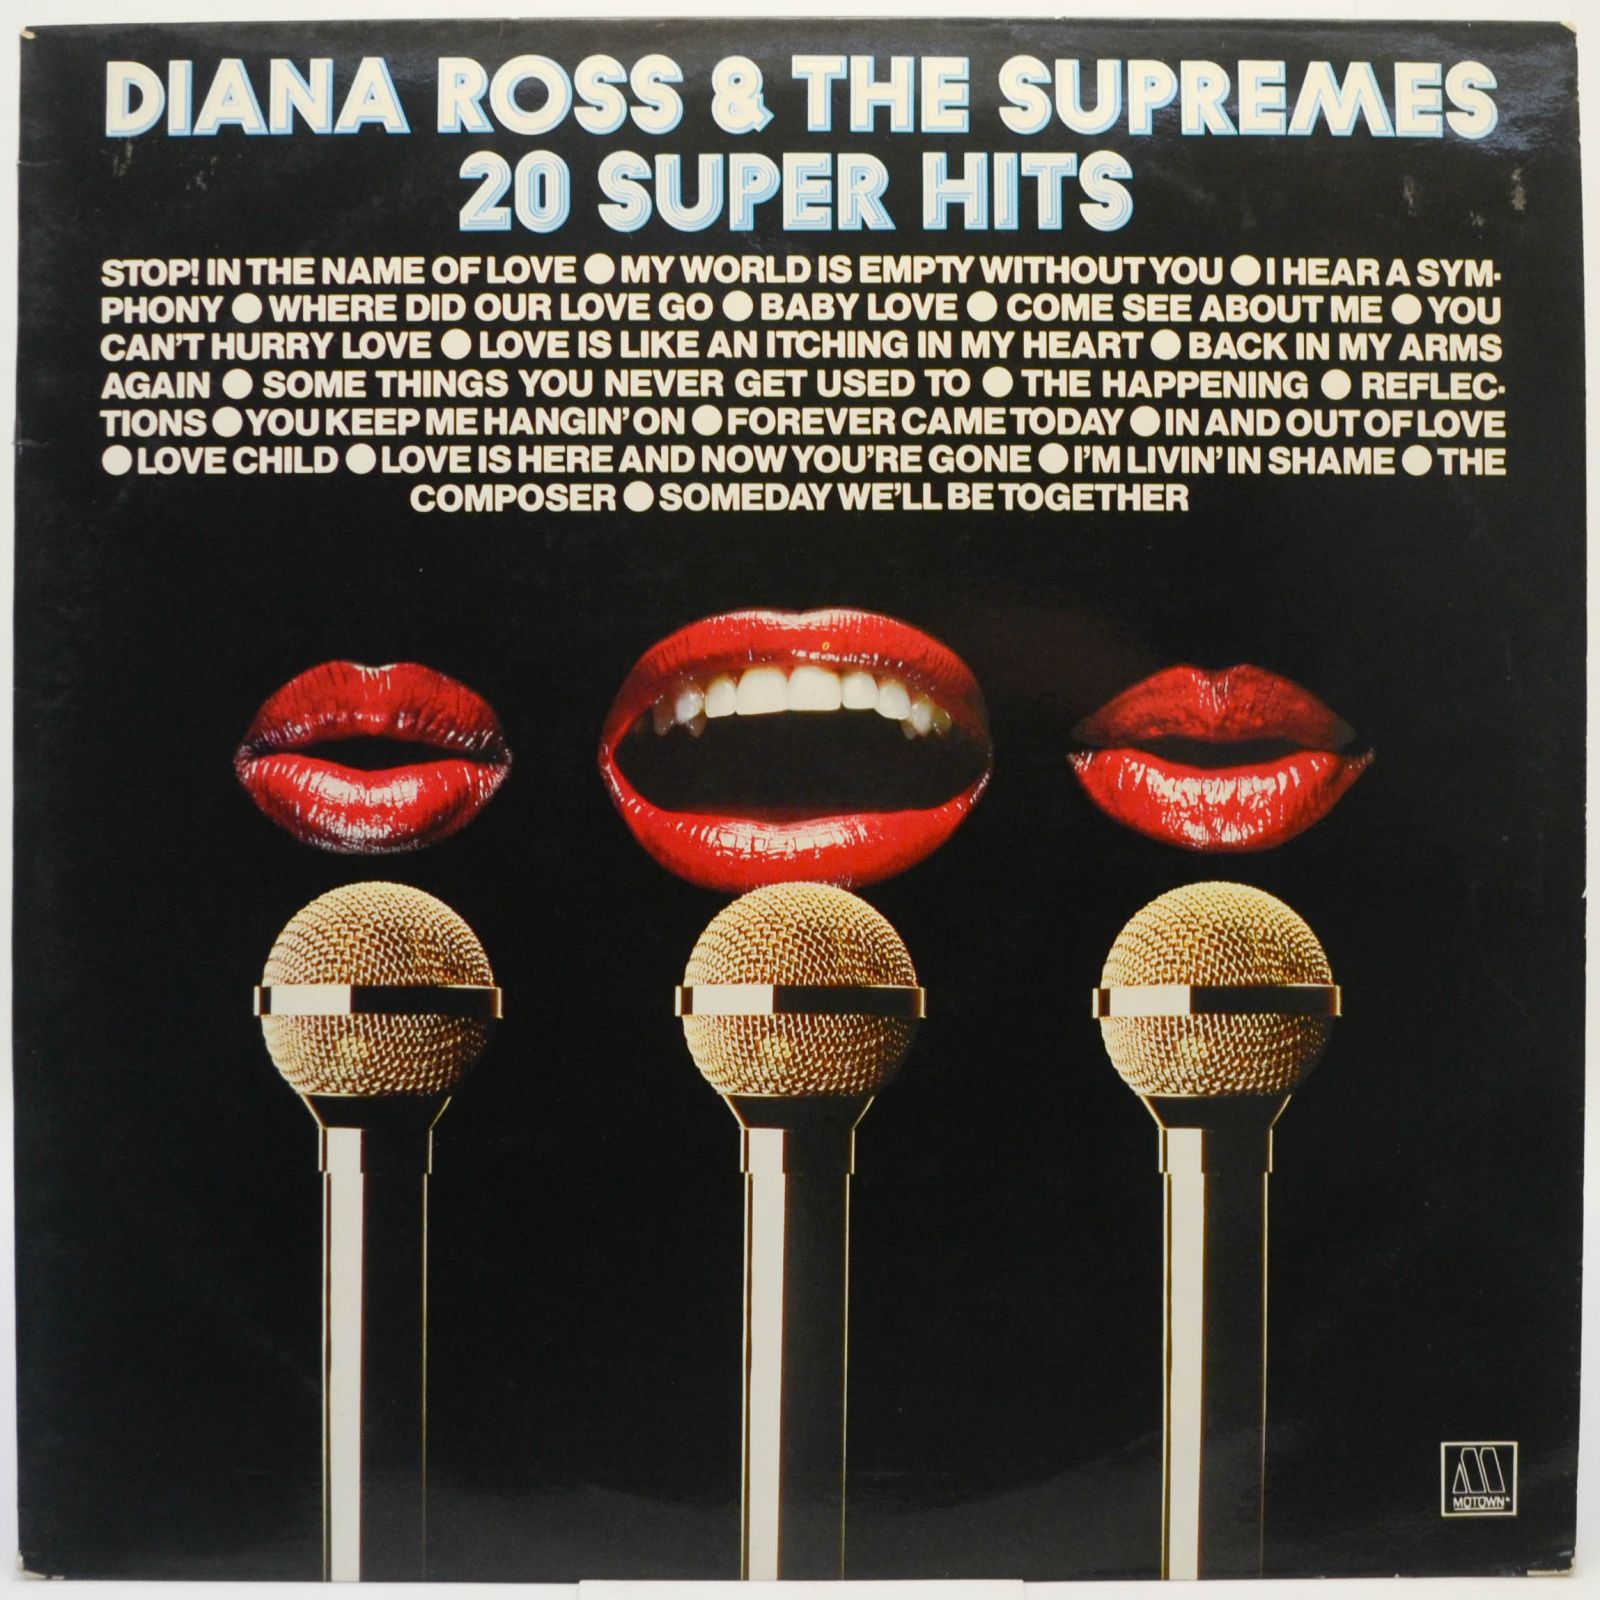 Diana Ross & The Supremes — 20 Super Hits, 1981